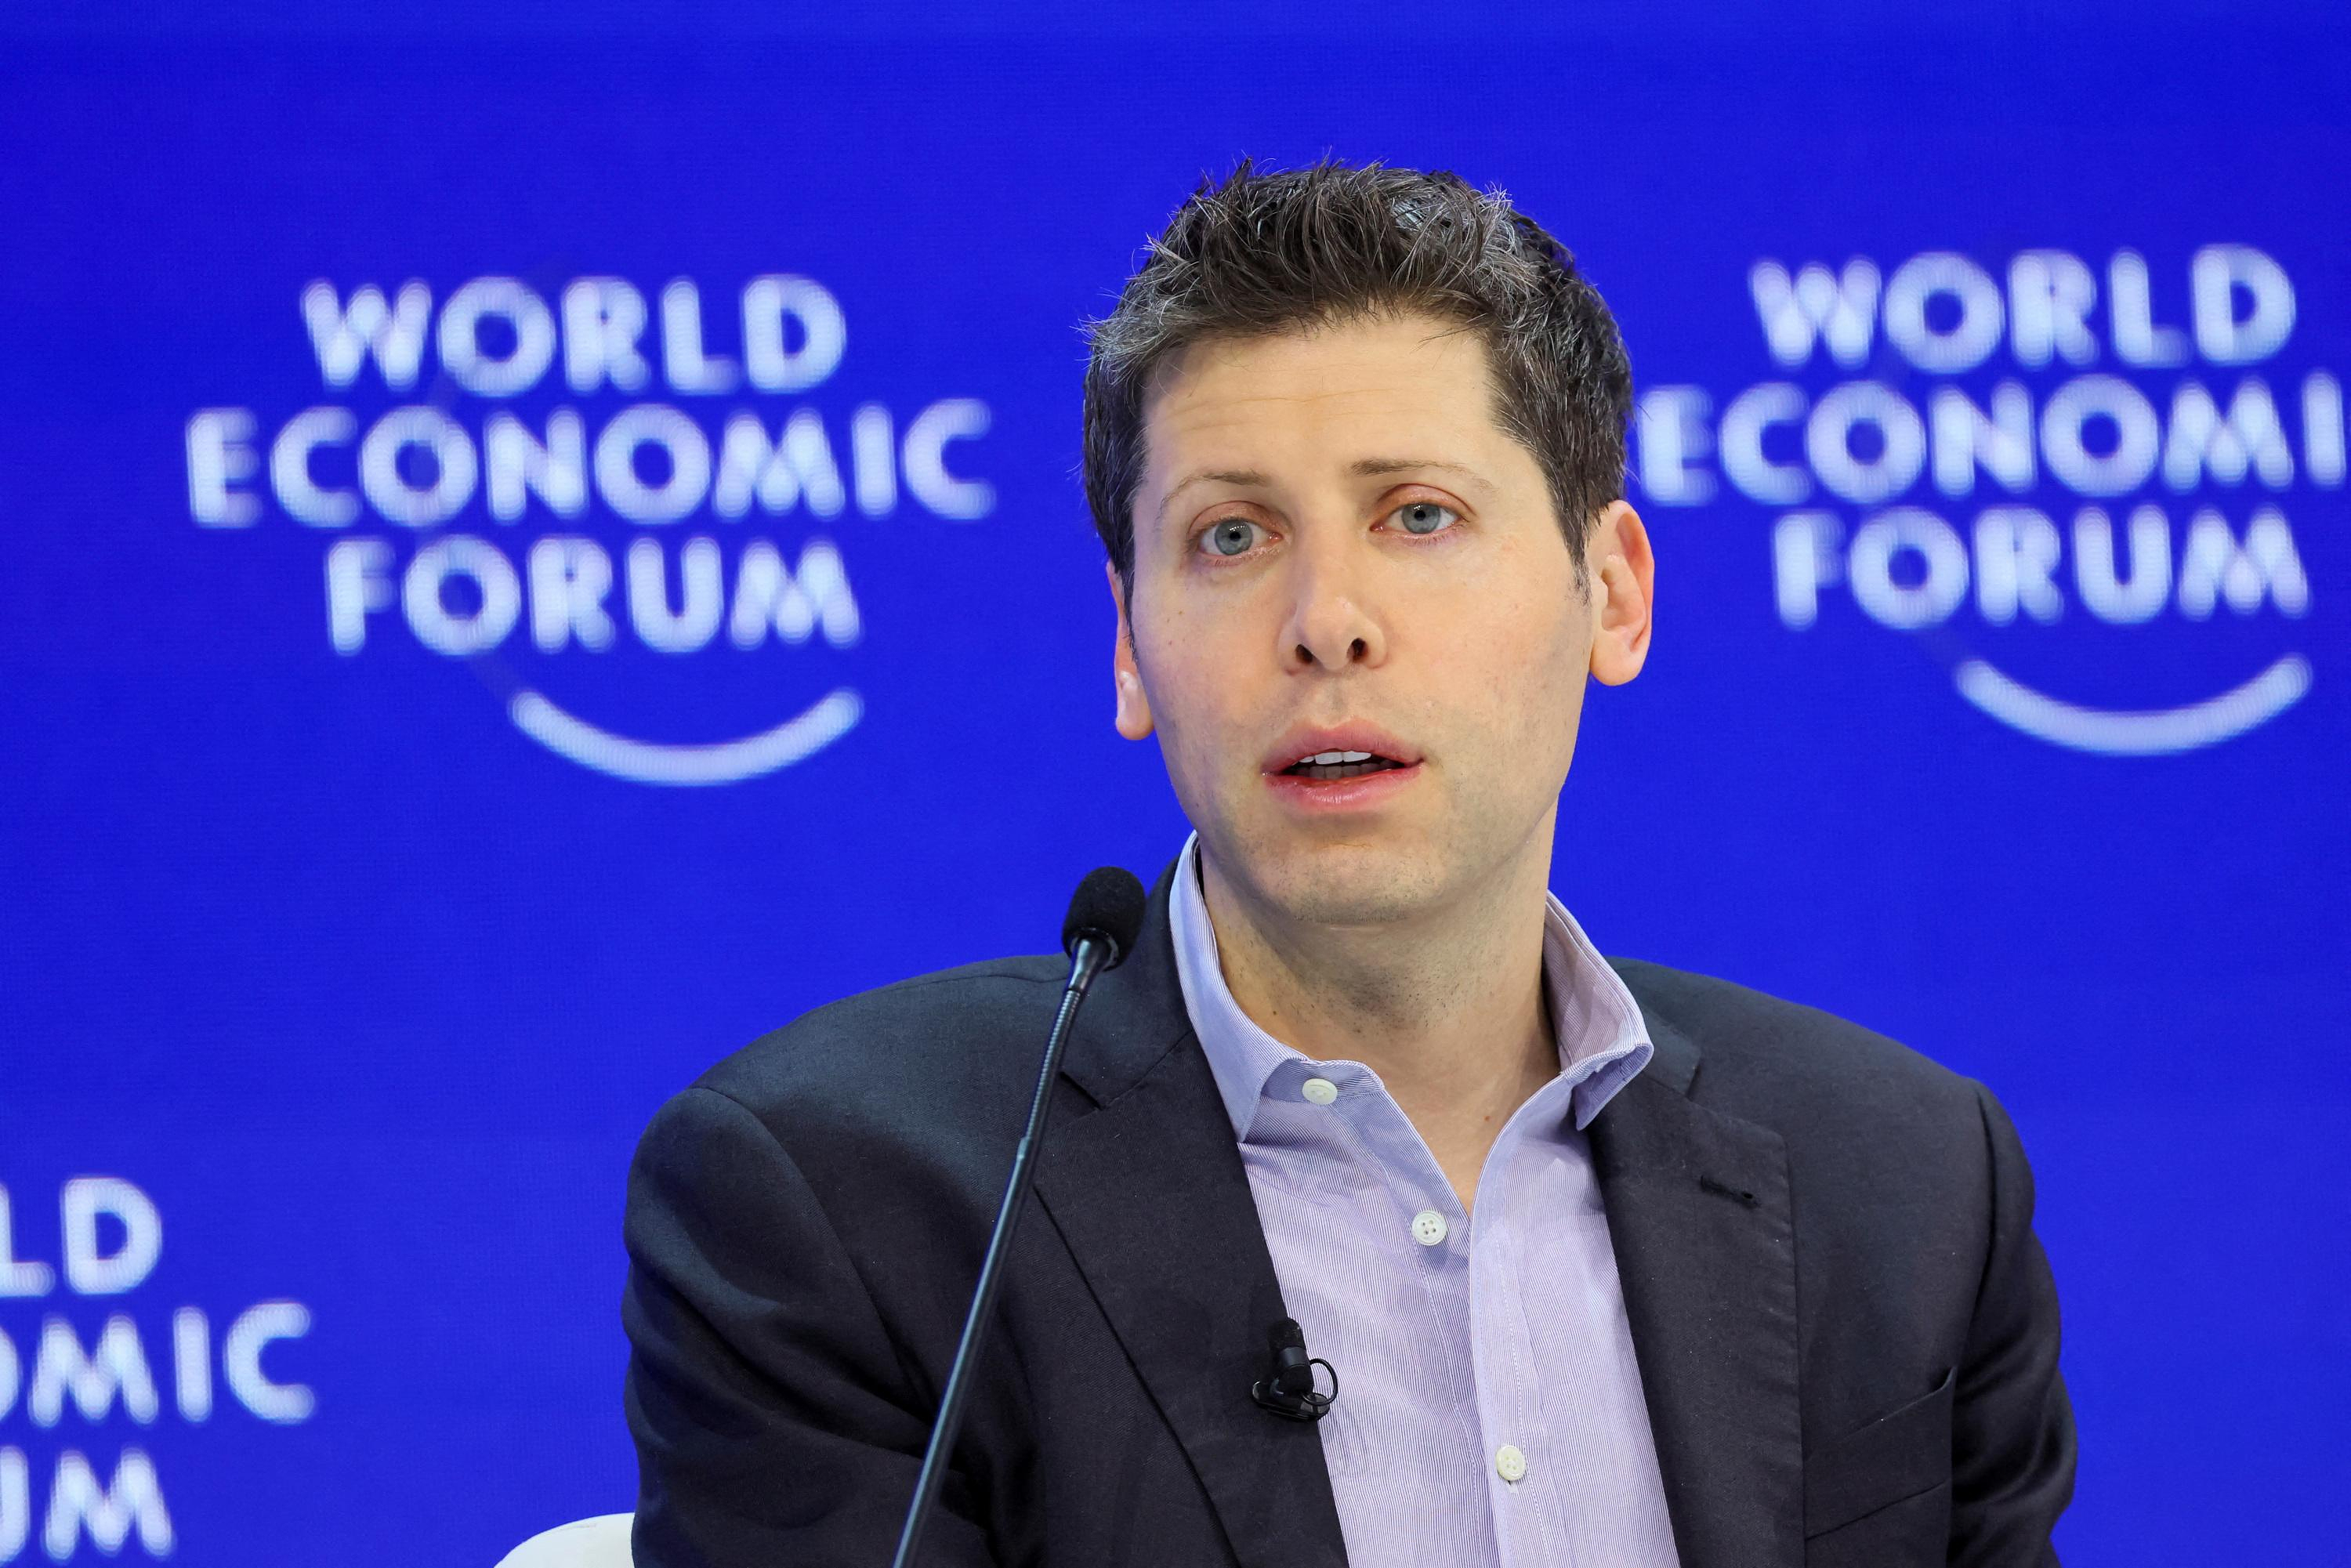 After AI, Sam Altman wants to tackle the semiconductor market with trillions of dollars